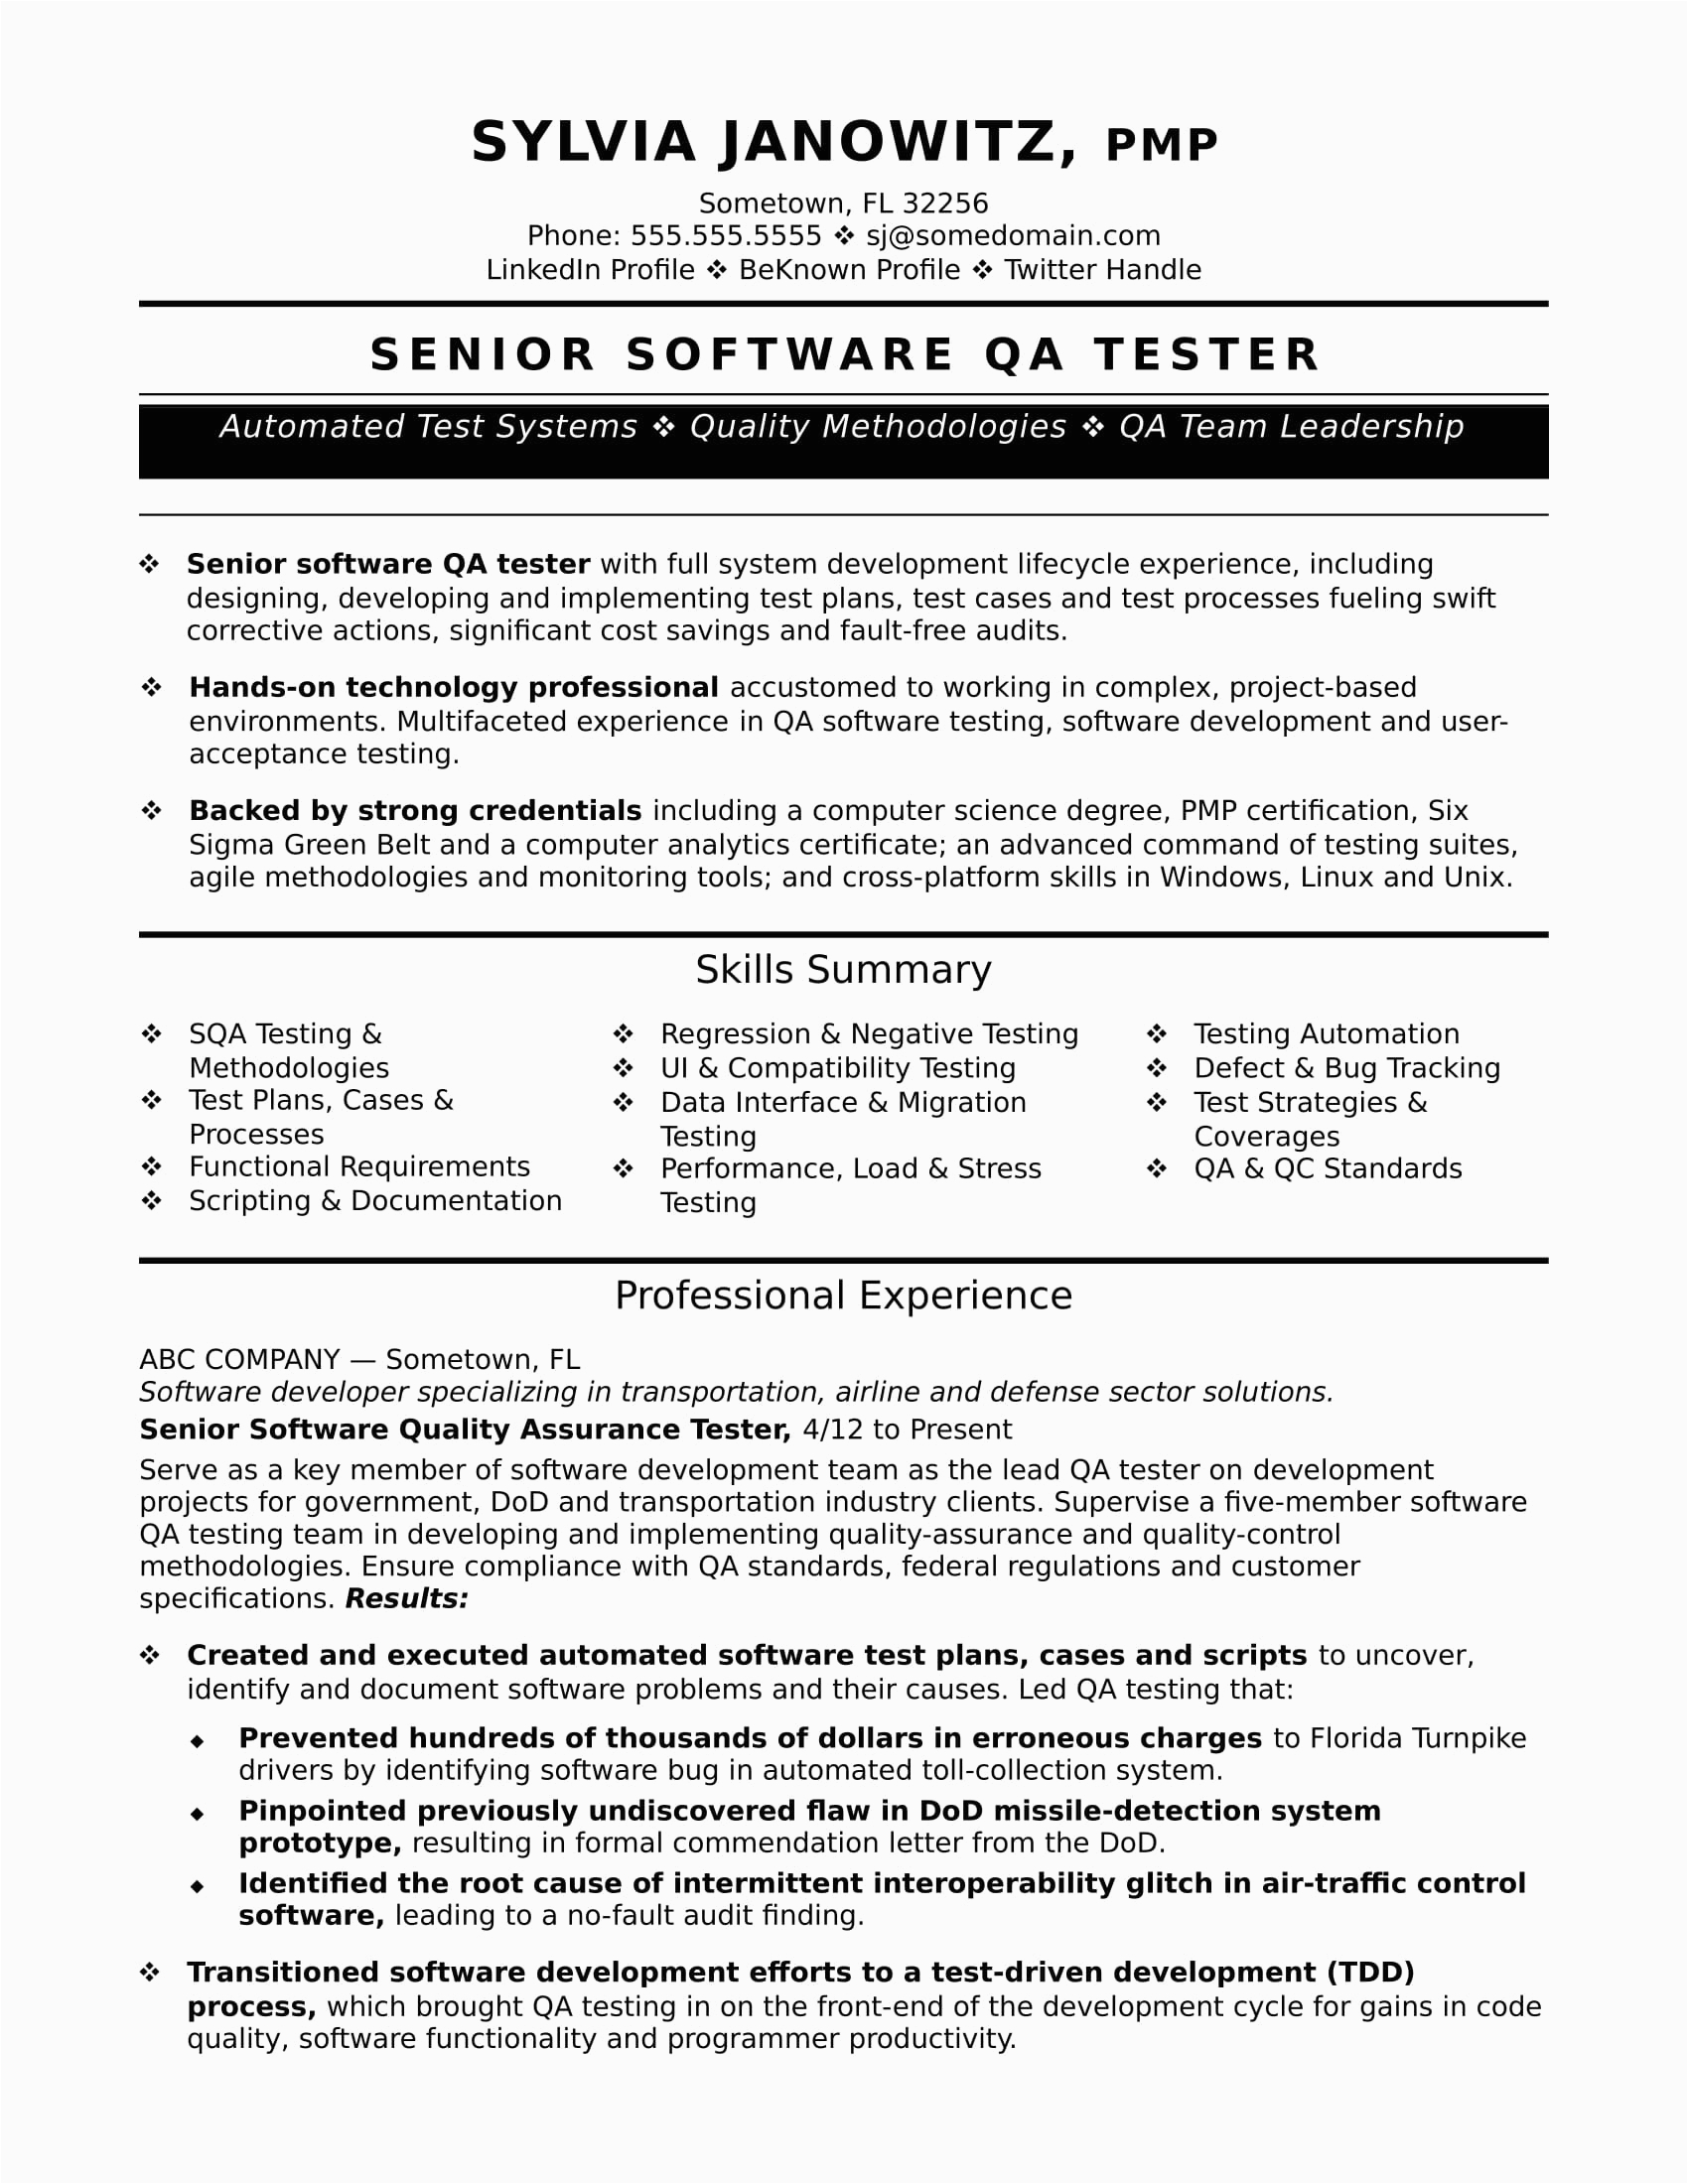 manual testing resume sample for 5 years experience or 500